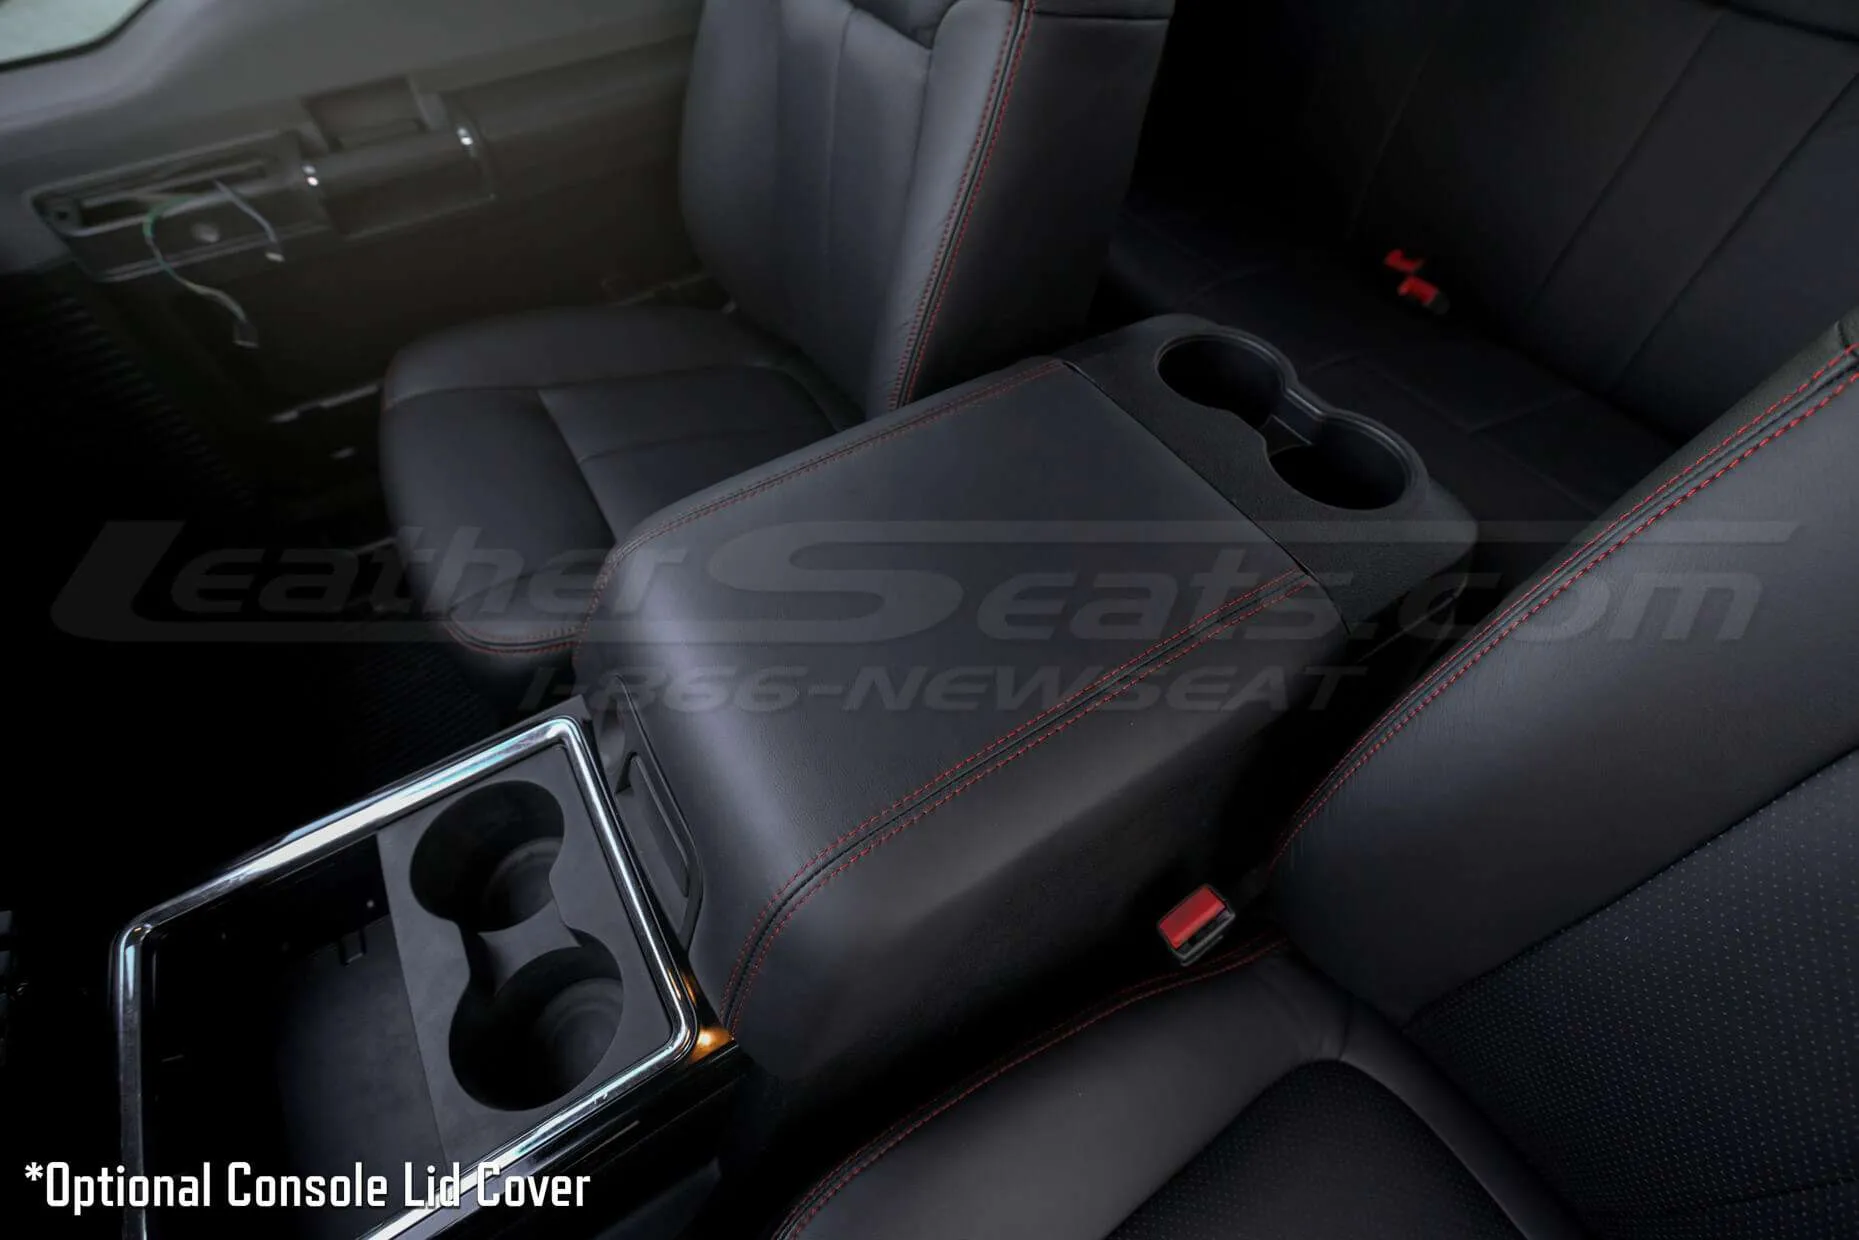 Optional console Lid Cover